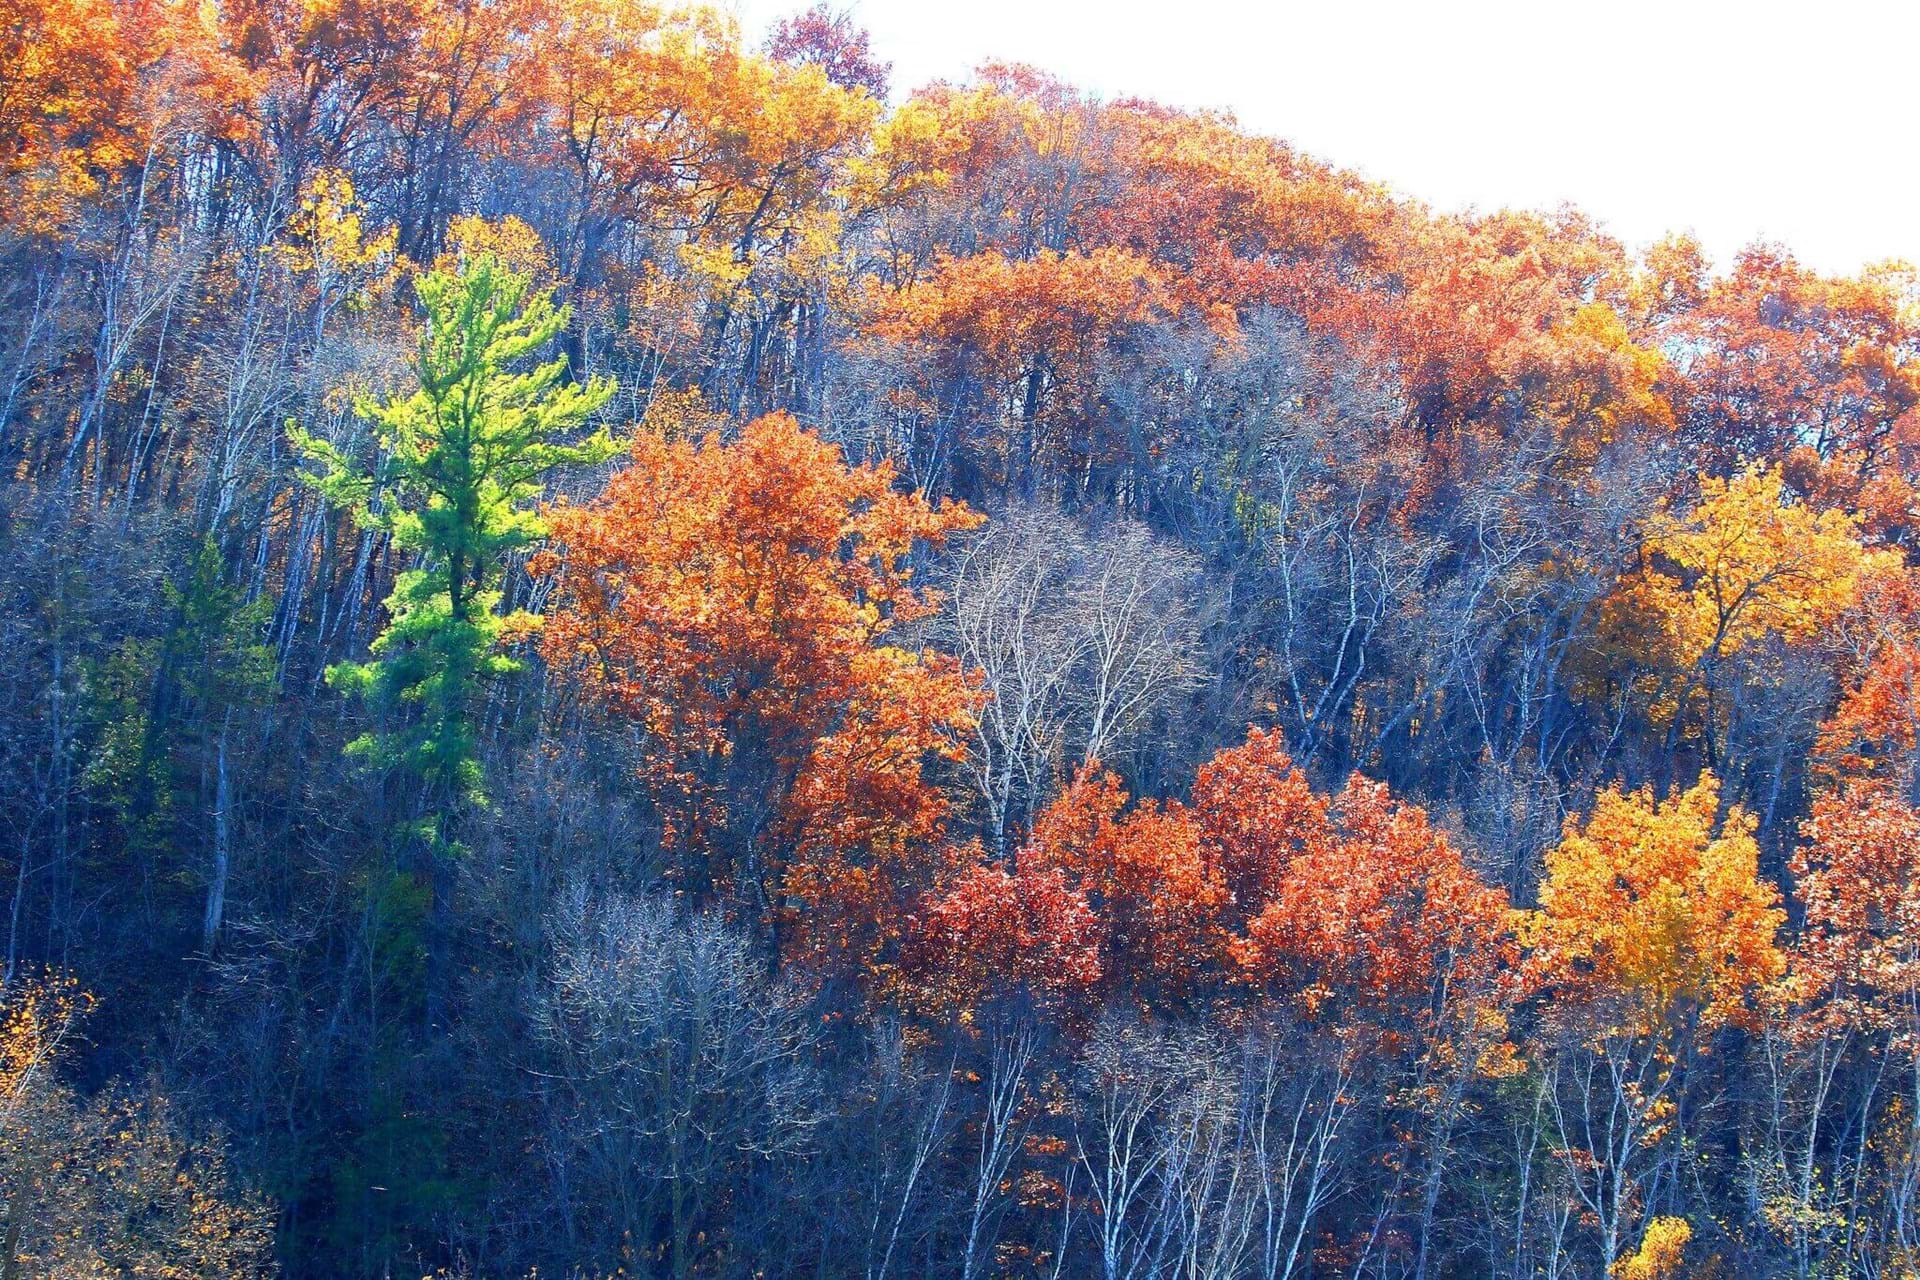 Some bare and orange colored trees on a hill